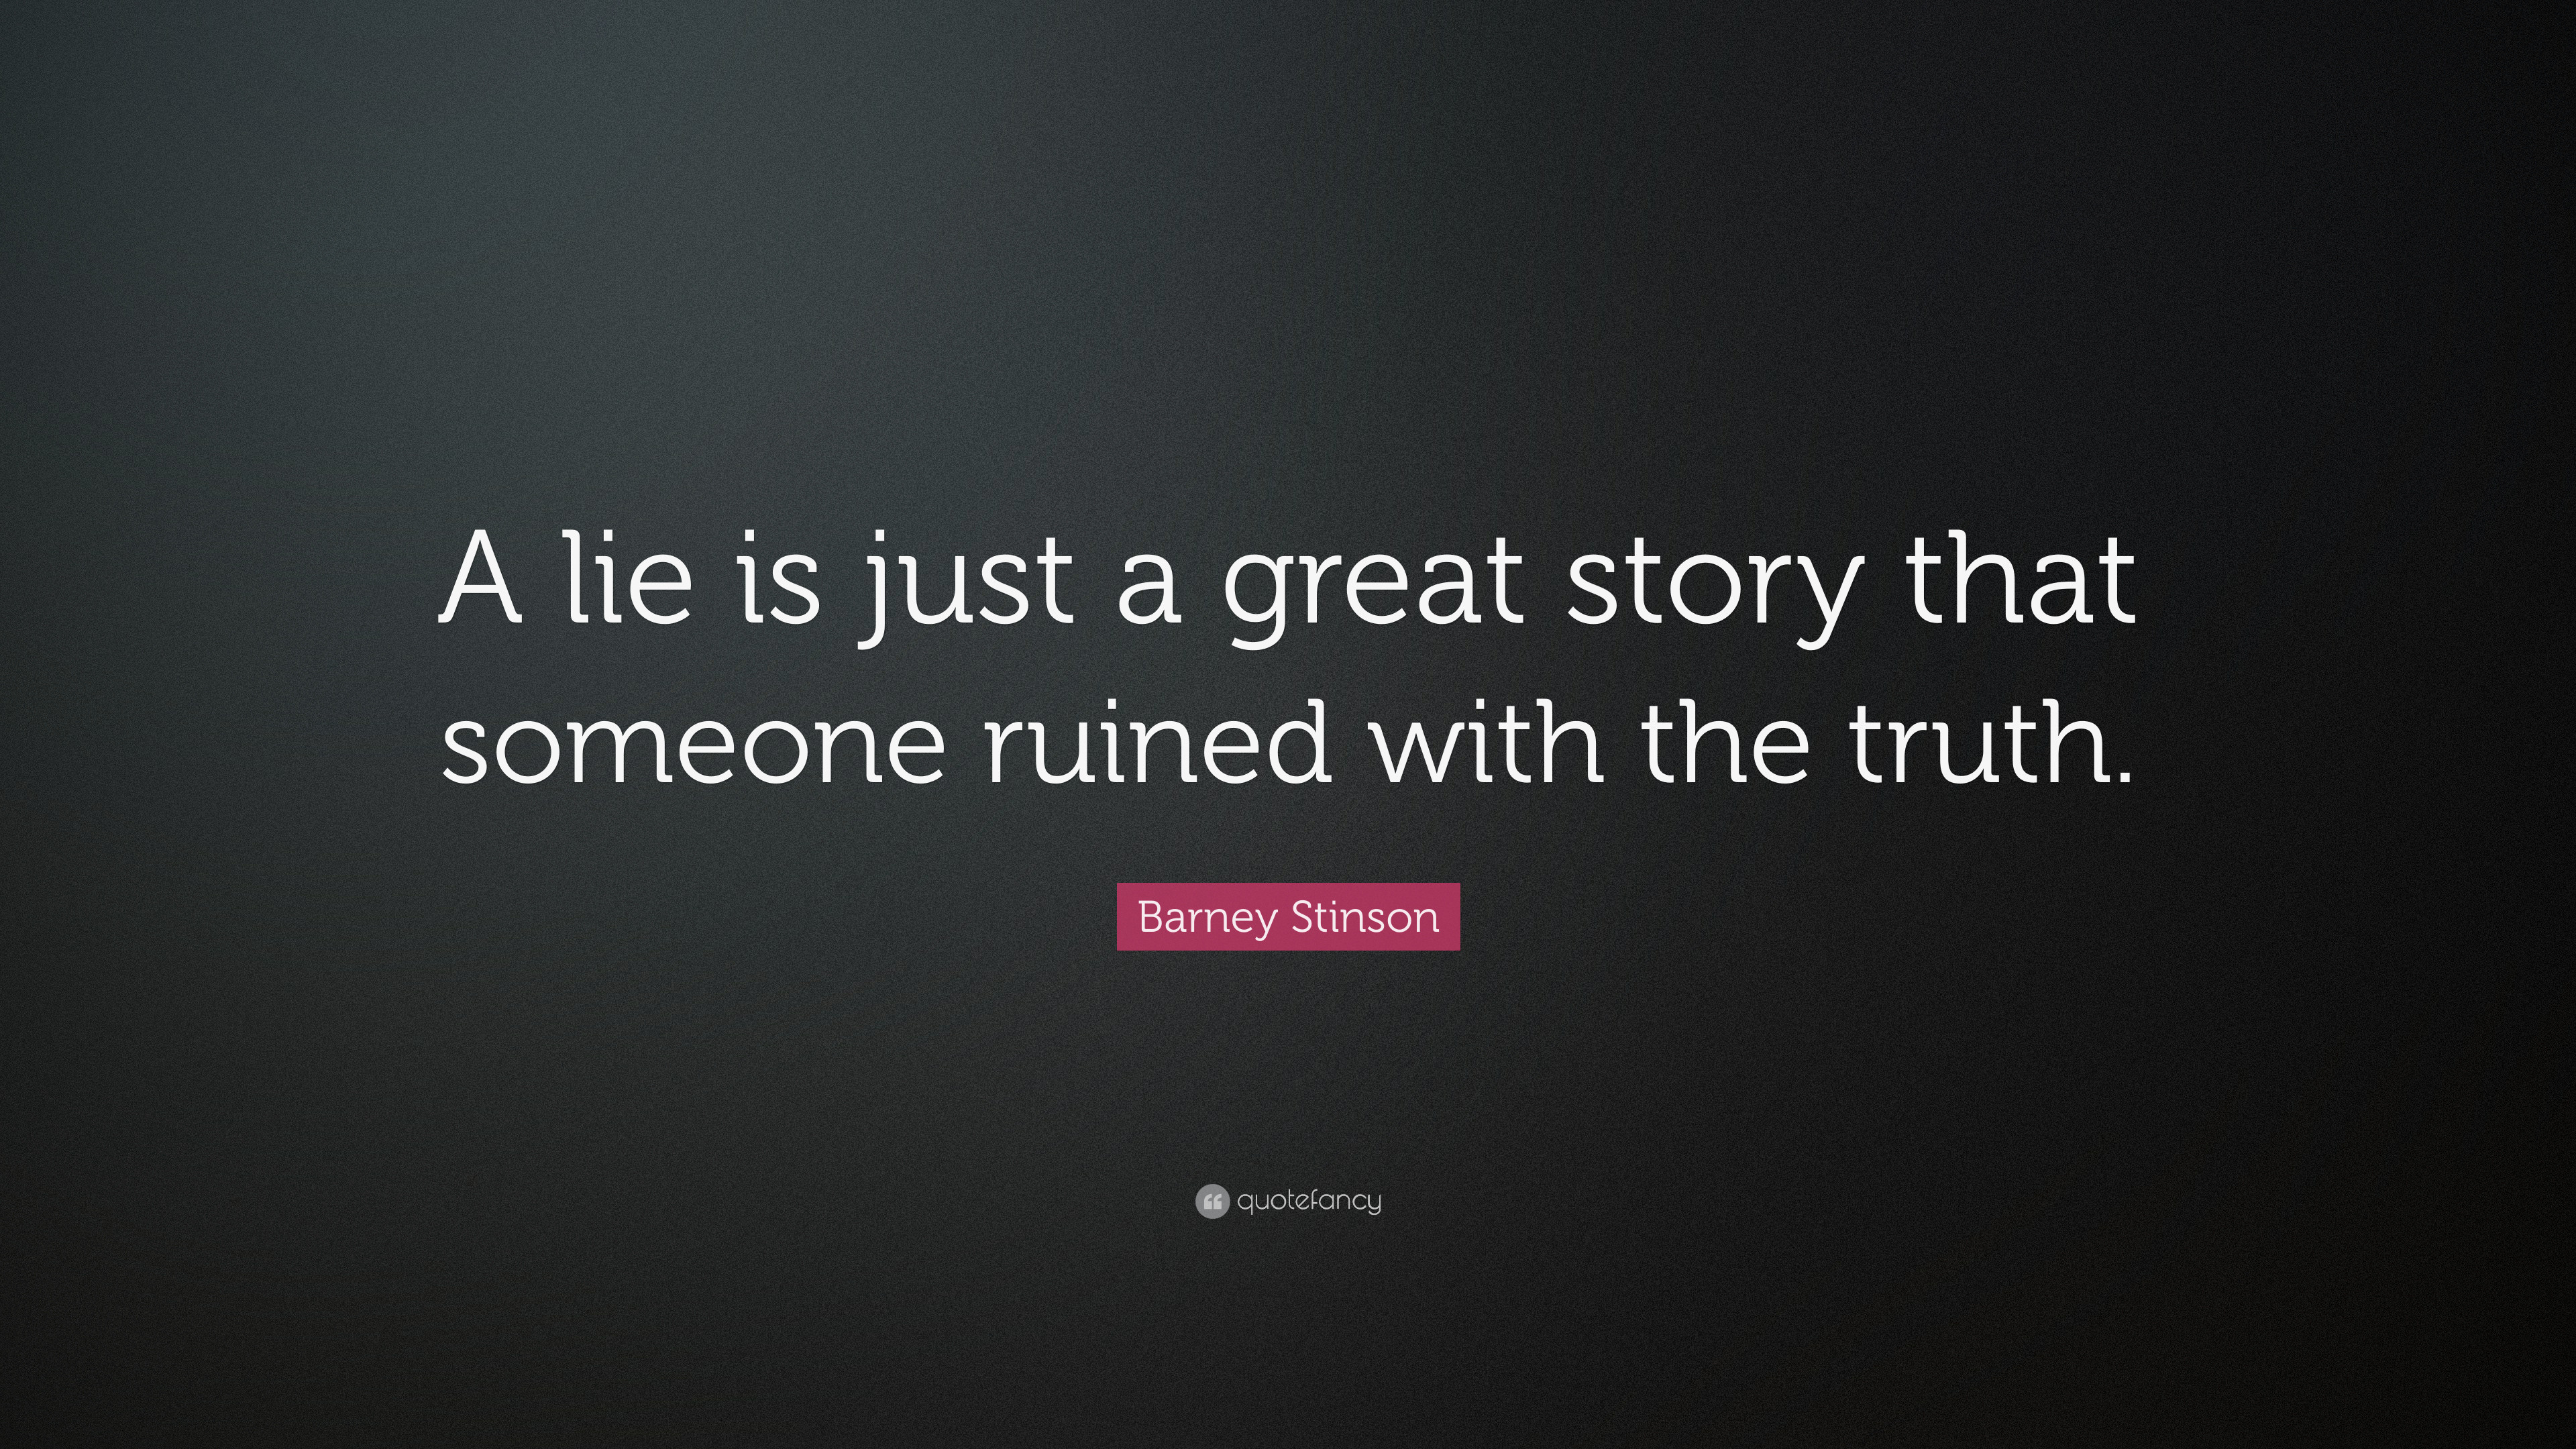 3840x2160 Barney Stinson Quote: “A lie is just a great story that someone ruined with